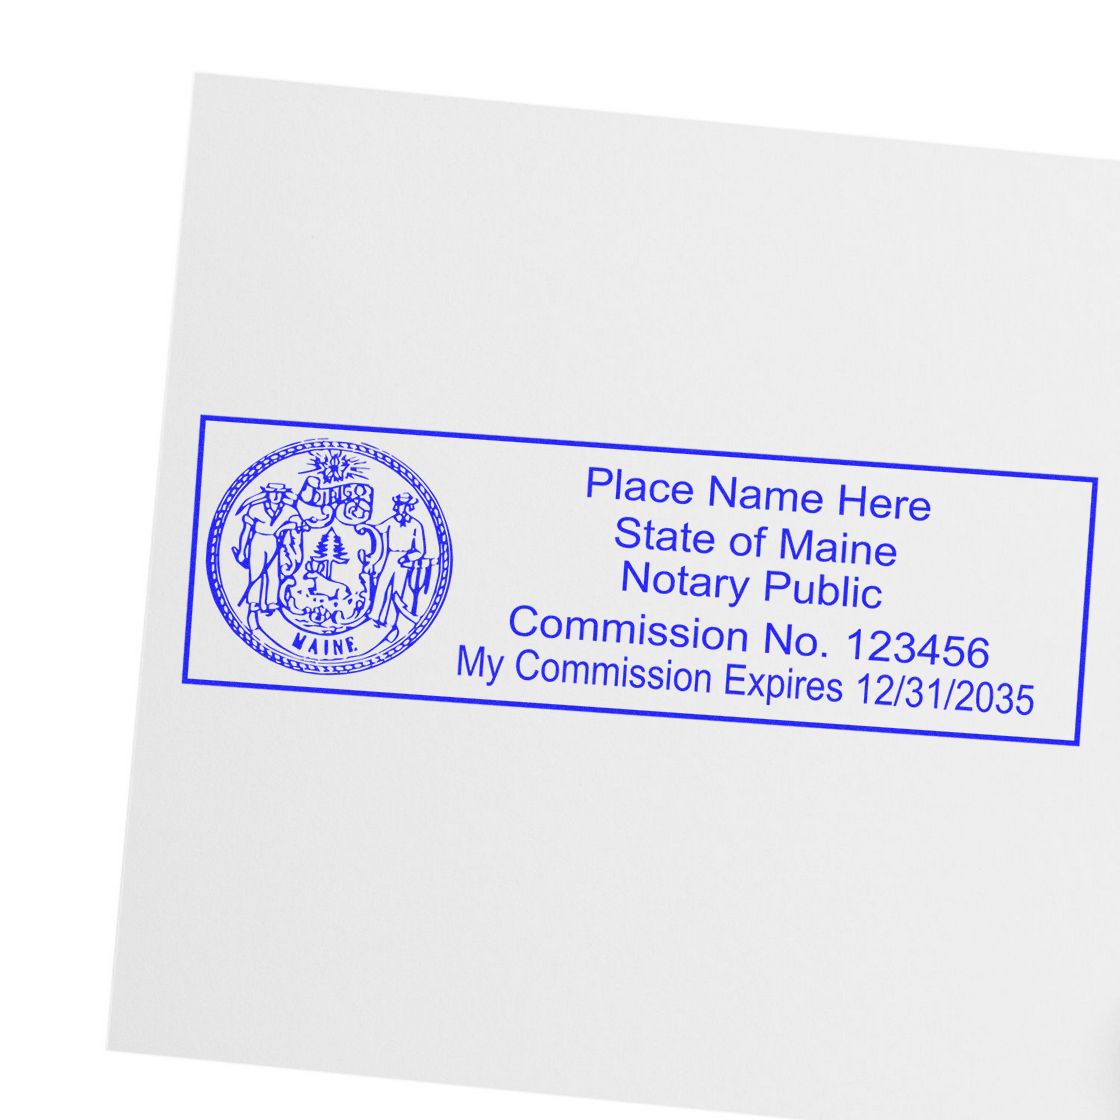 This paper is stamped with a sample imprint of the Wooden Handle Maine State Seal Notary Public Stamp, signifying its quality and reliability.